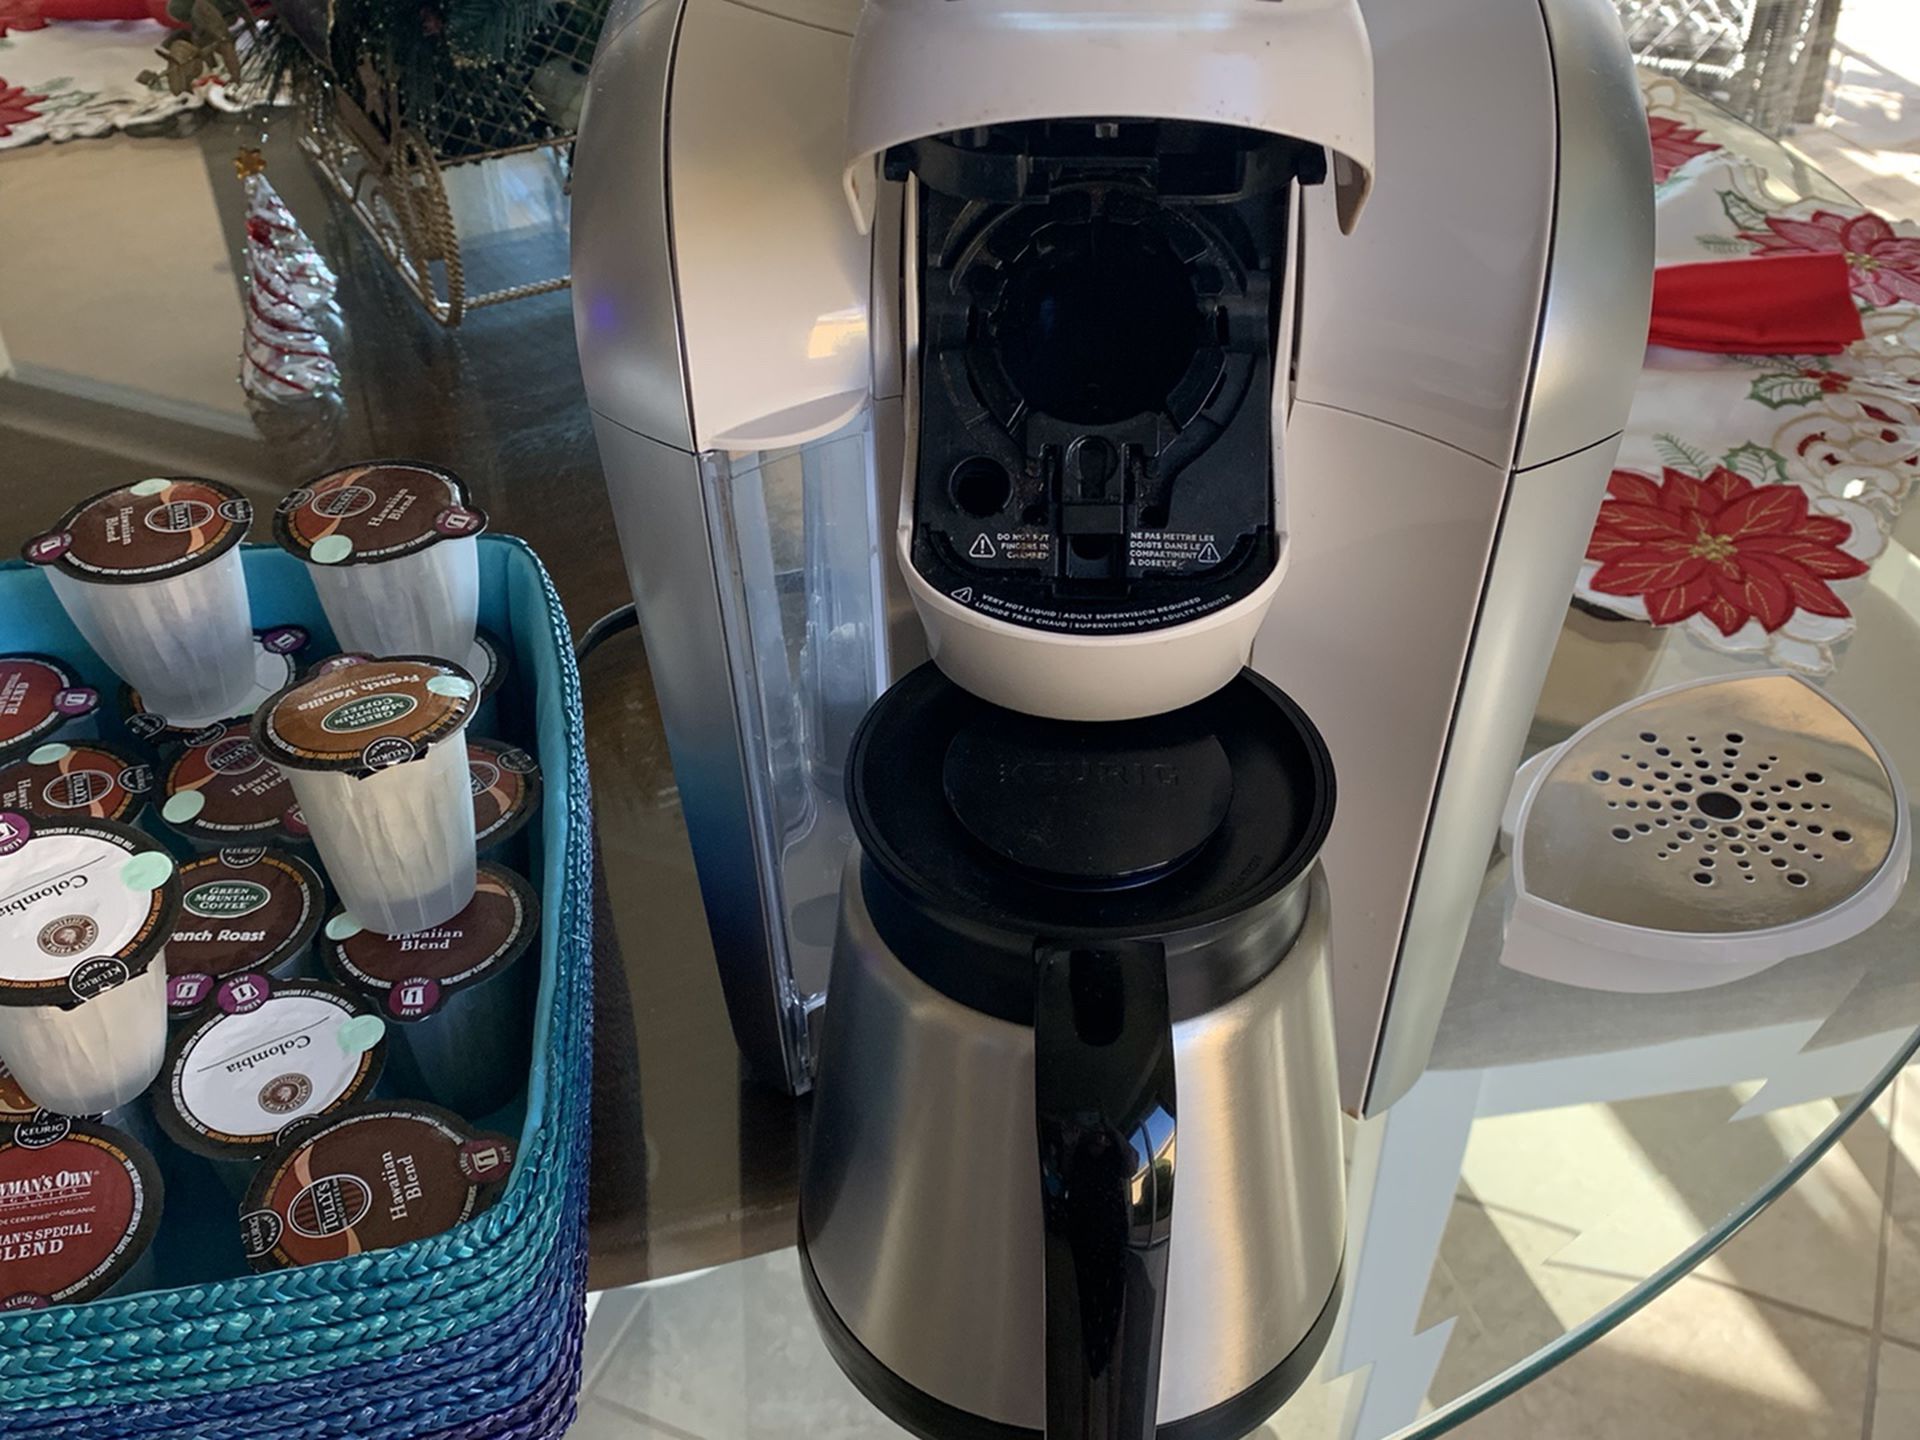 Keurig Coffee Maker With Pods and Accessories